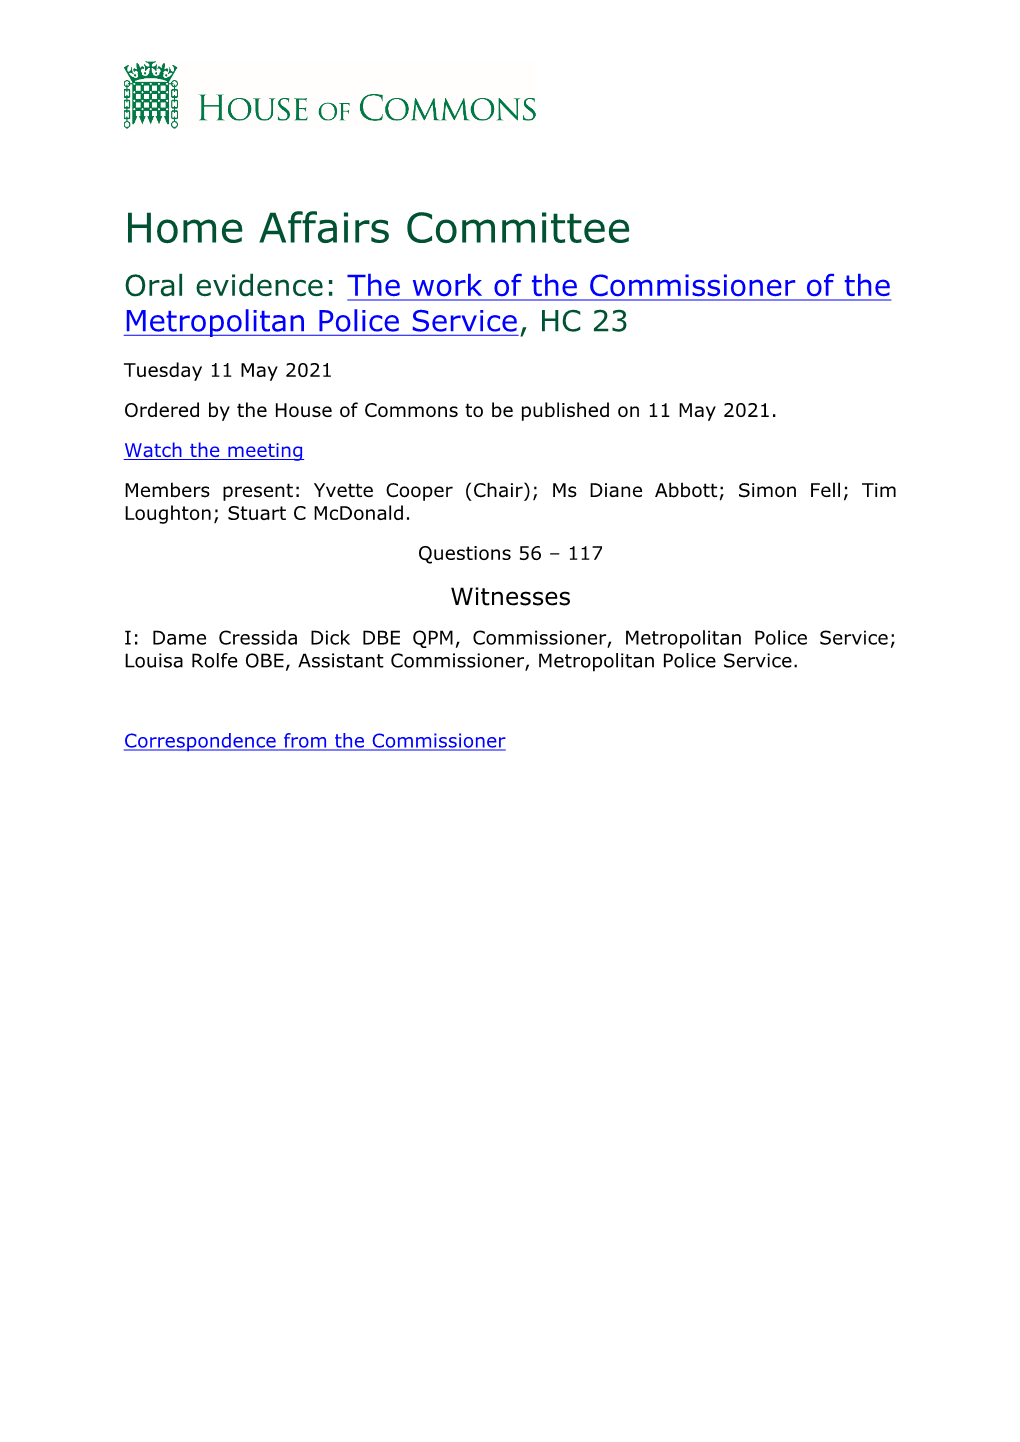 Home Affairs Committee Oral Evidence: the Work of the Commissioner of the Metropolitan Police Service, HC 23